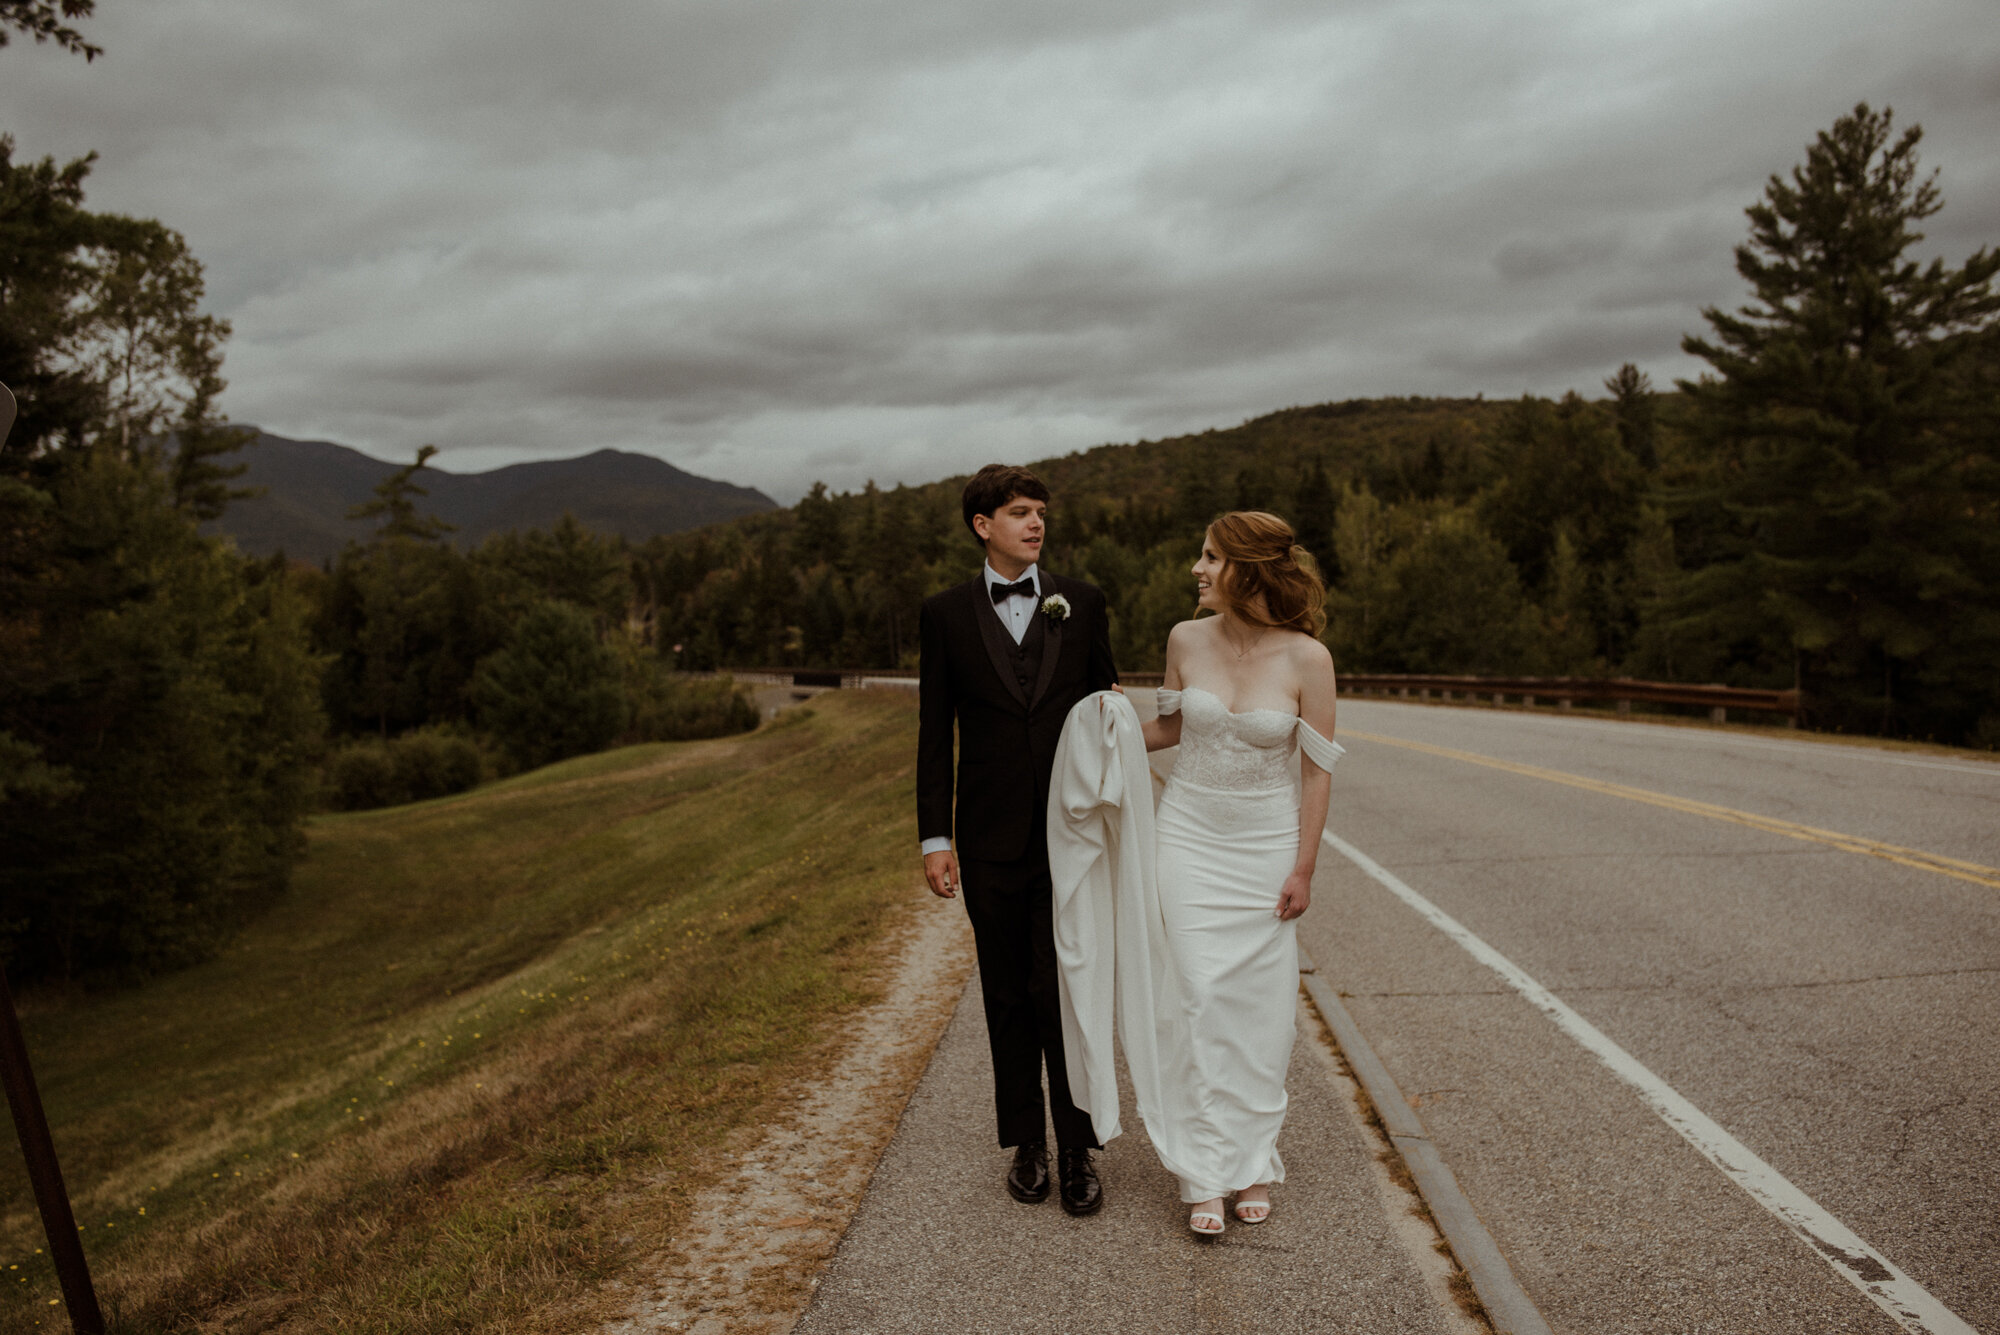 Autumn Elopement in New Hampshire - Backyard Wedding during COVID and Sunrise Hike in Wedding Dress - White Sails Creative_88.jpg